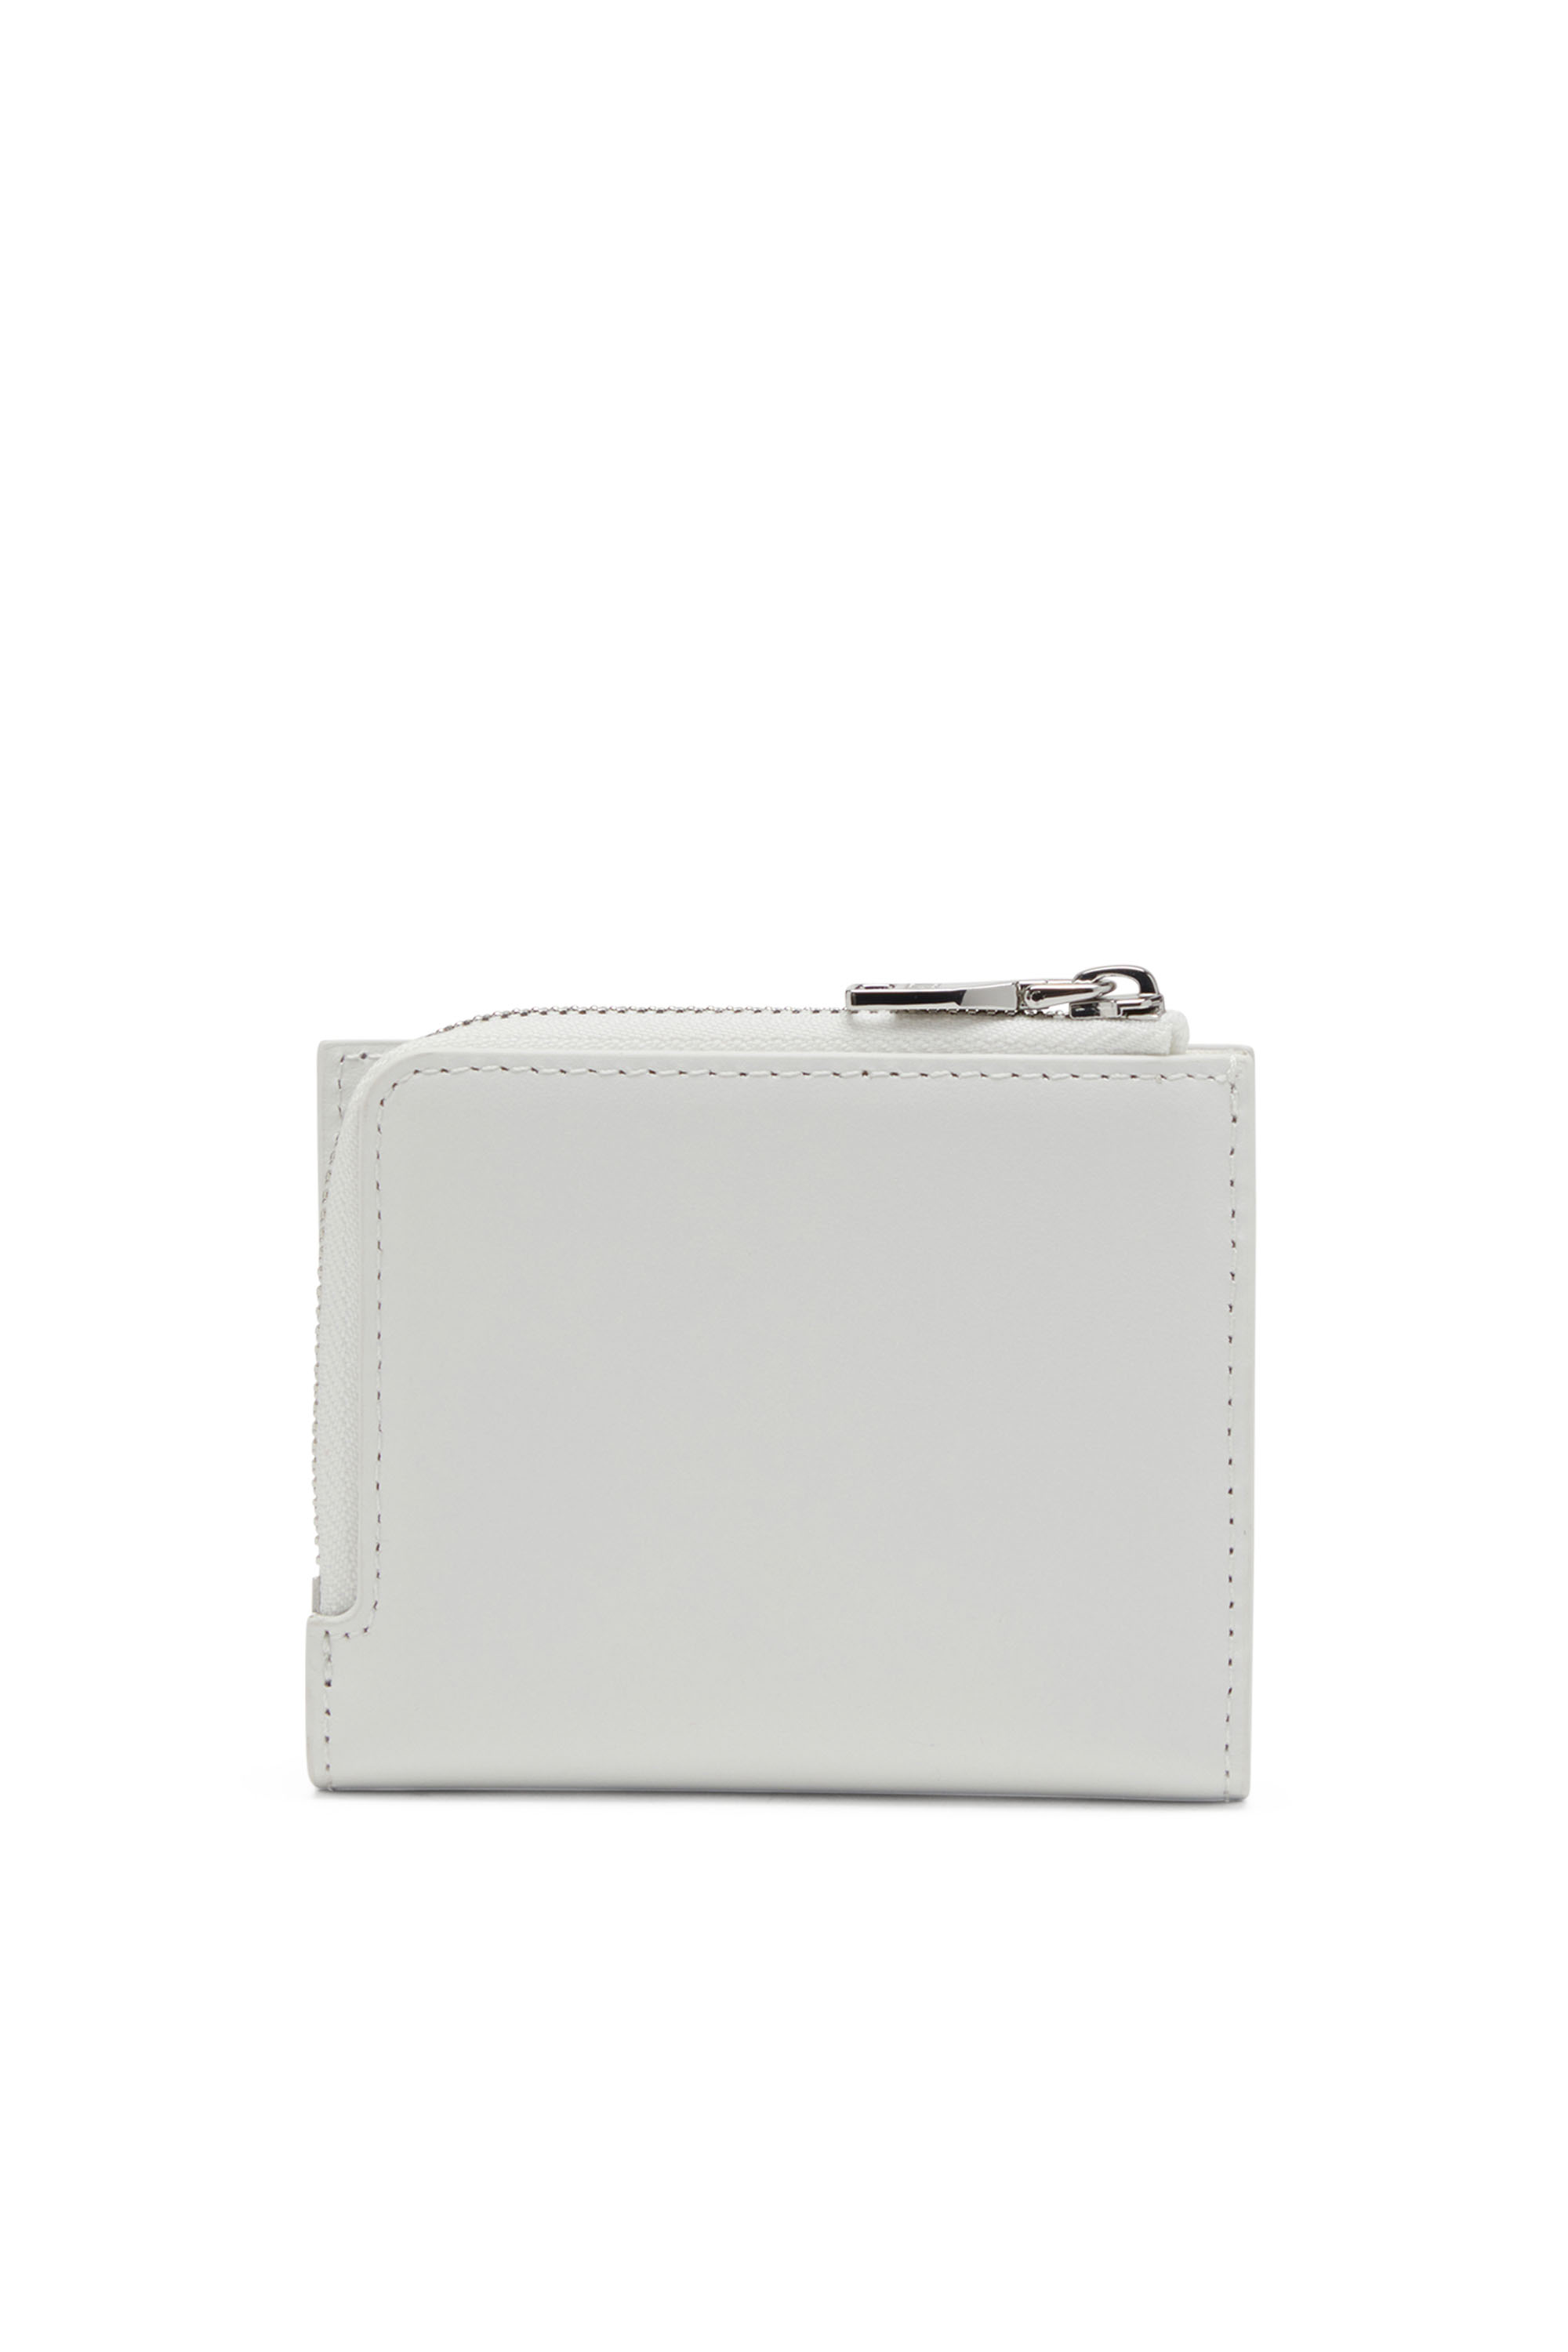 Diesel - 1DR CARD HOLDER ZIP L, Woman Bi-fold card holder in nappa leather in White - Image 2